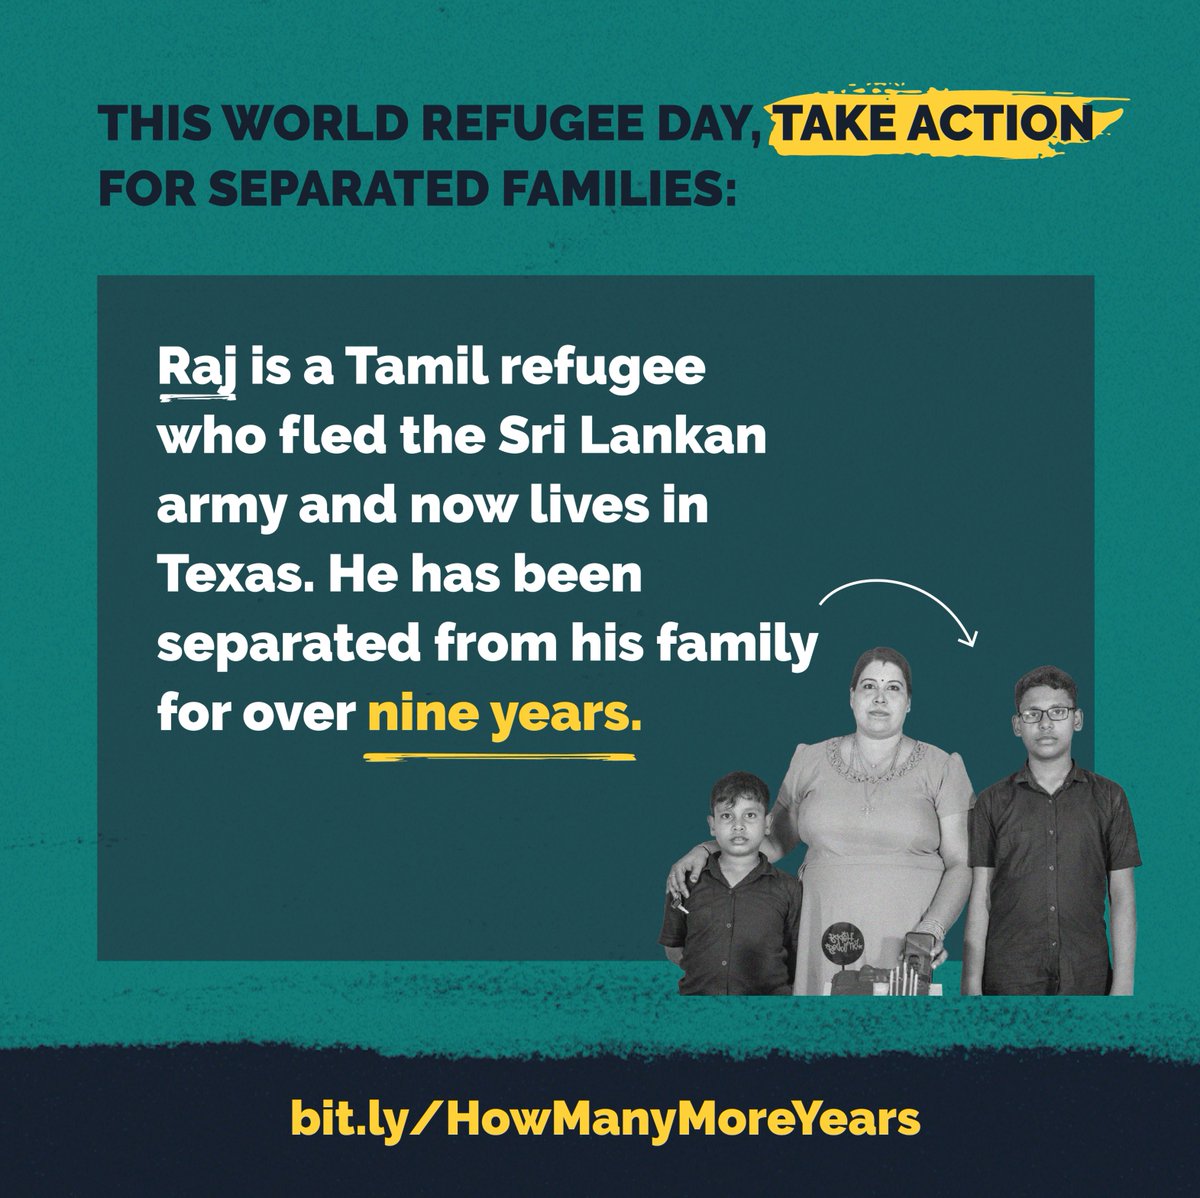 Raj is a refugee who fled Sri Lanka to escape persecution from the army. He was forced to make the journey to the US alone + has been waiting 9 yrs to reunite with family. #HowManyMoreYears will Raj’s family have to wait to celebrate #FathersDay together? bit.ly/HowManyMoreYea…